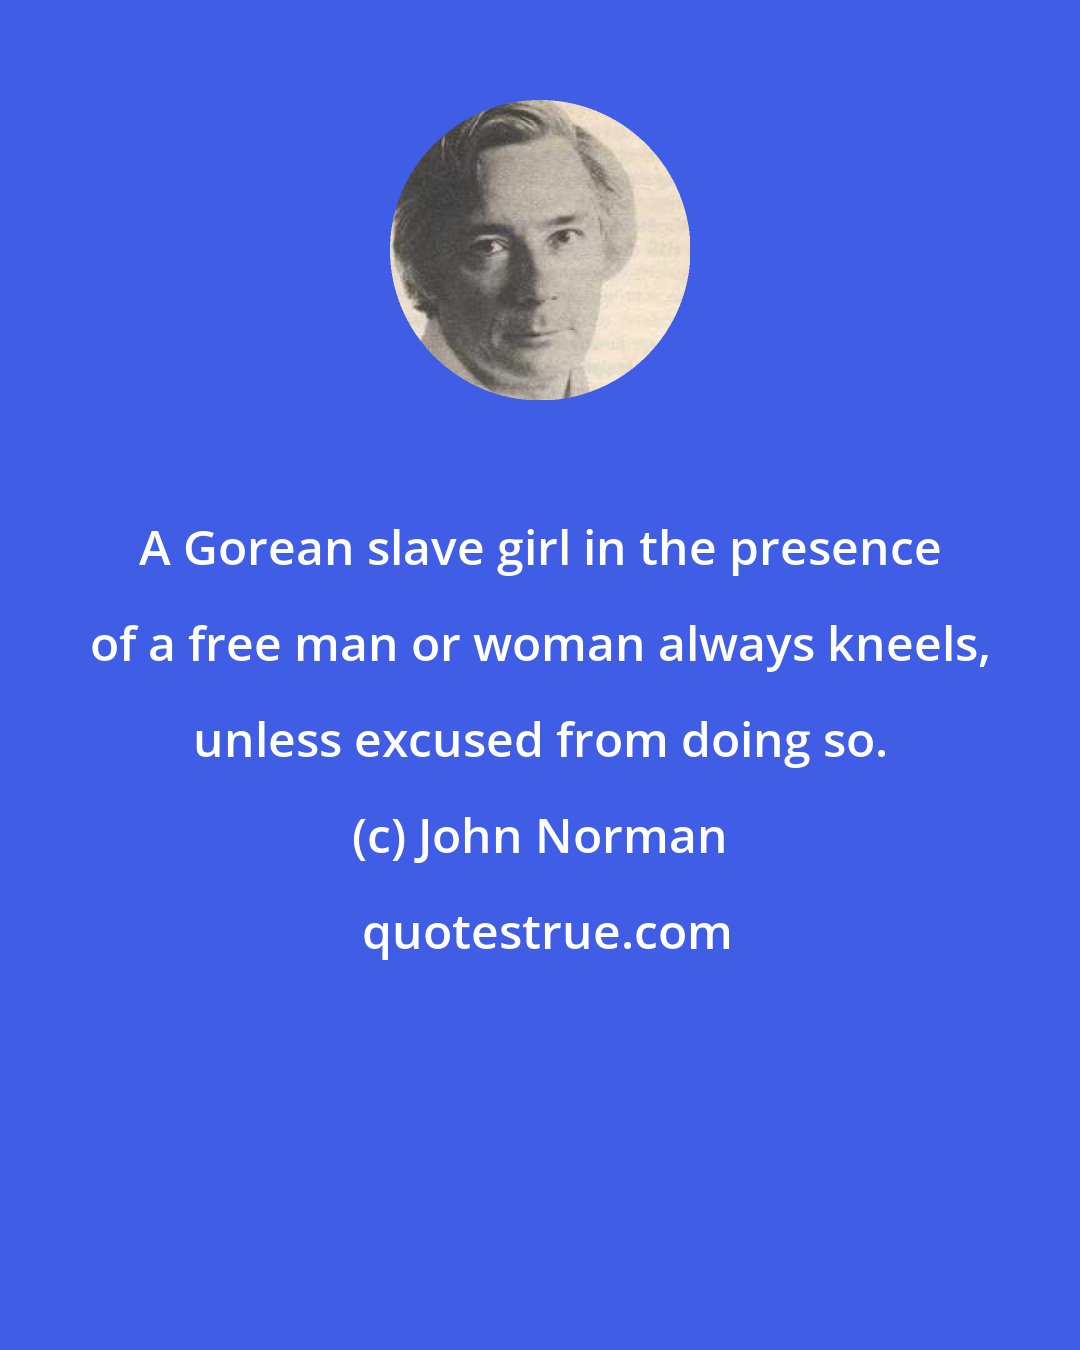 John Norman: A Gorean slave girl in the presence of a free man or woman always kneels, unless excused from doing so.